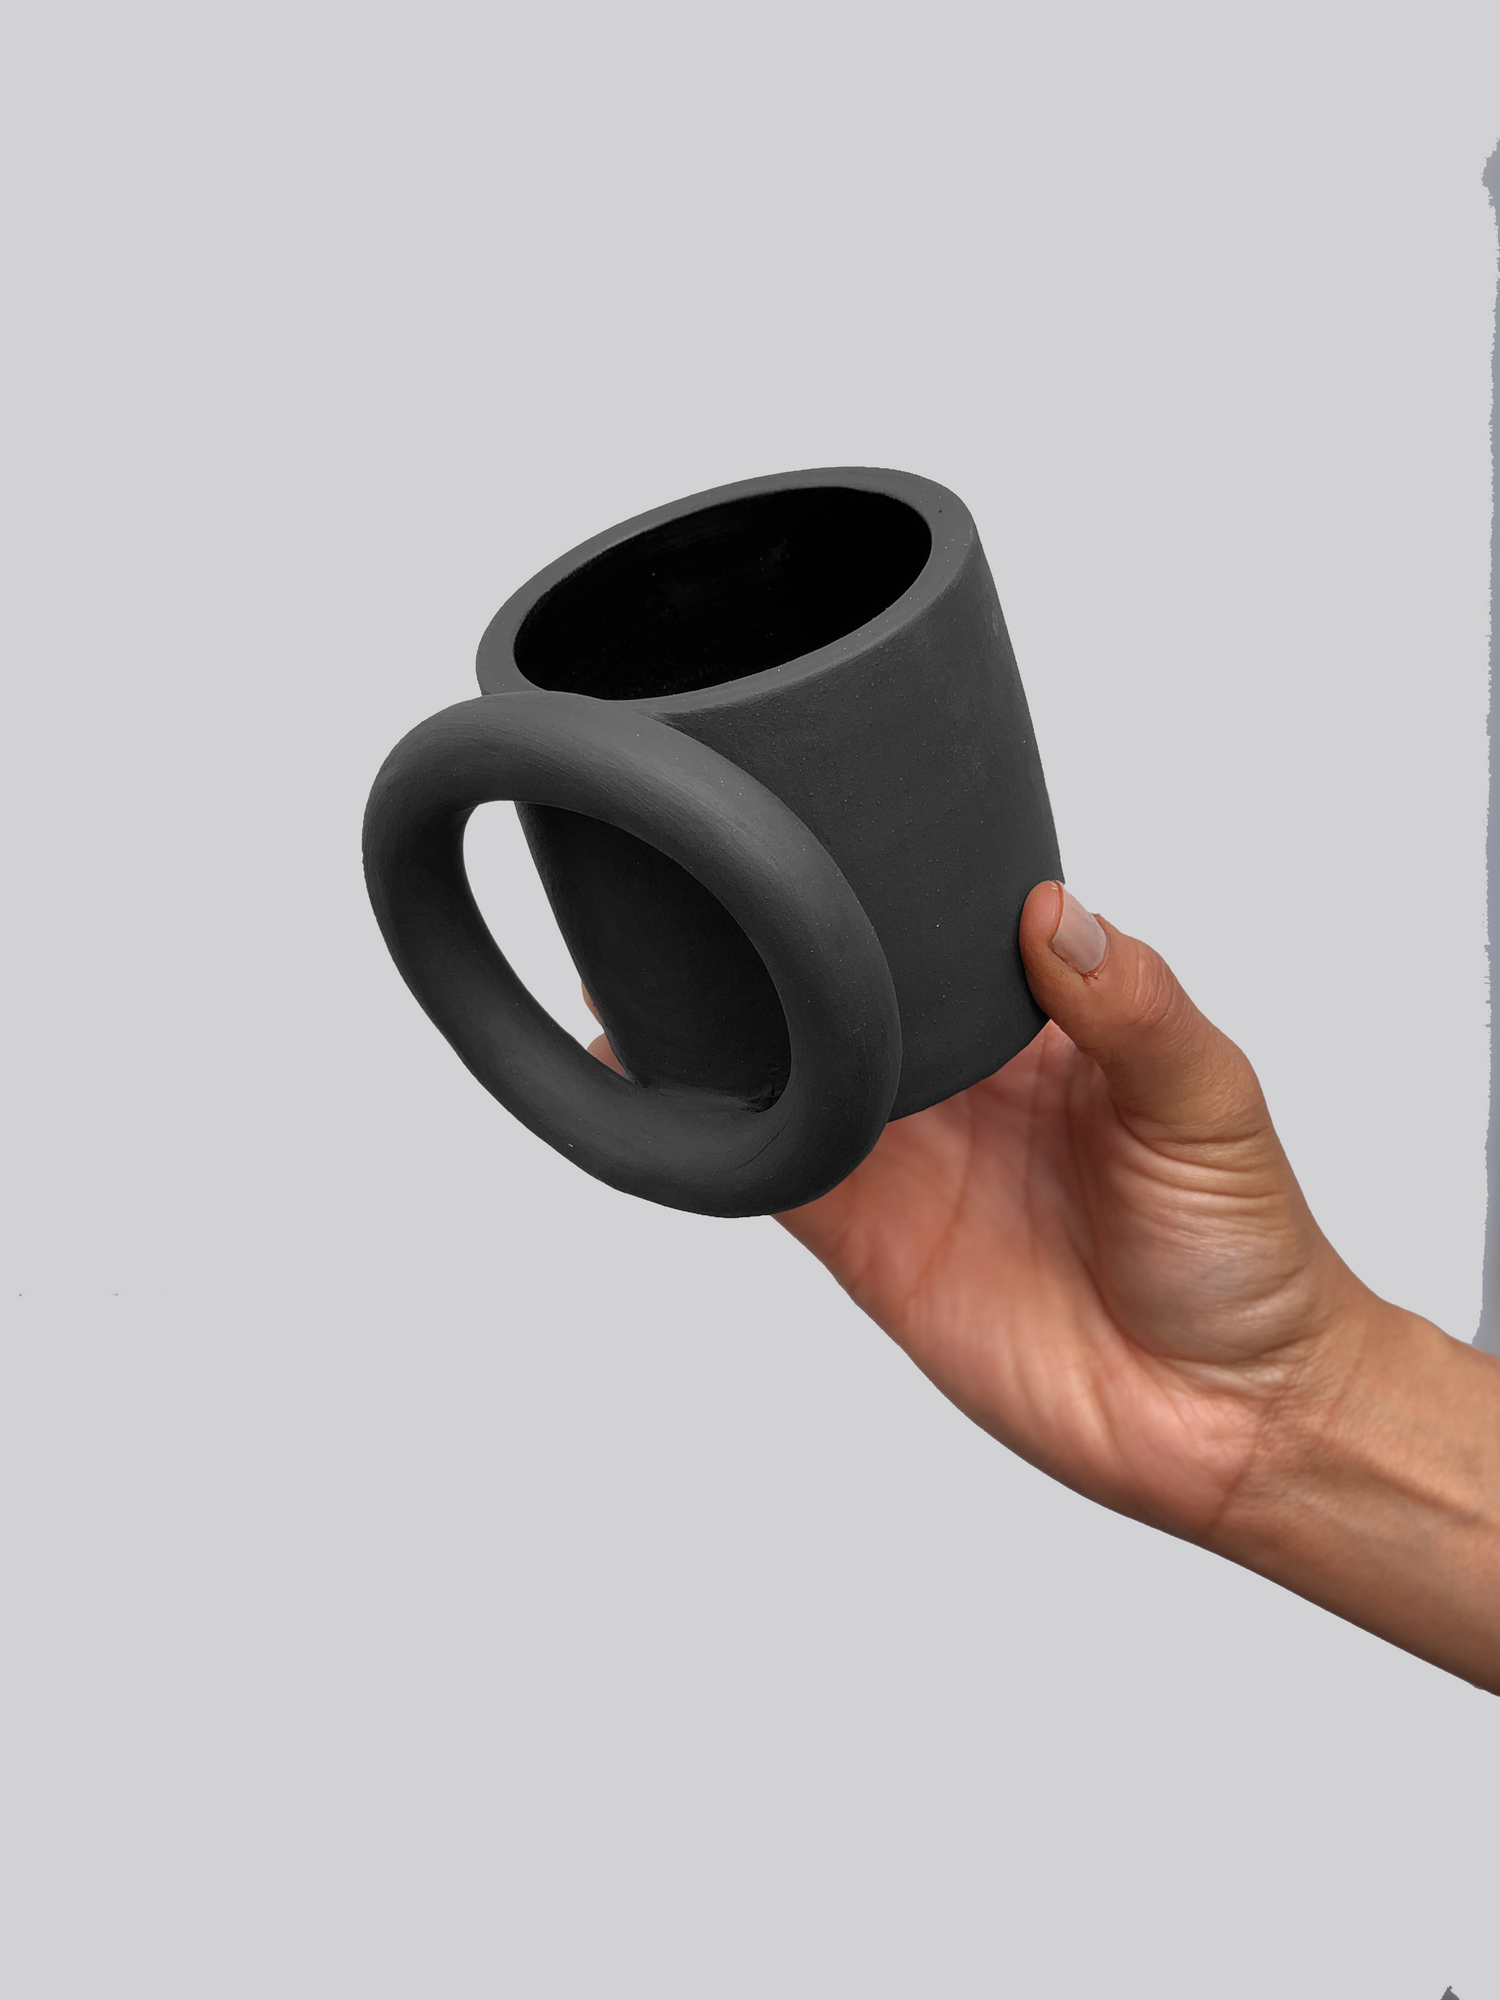 Black matte ceramic mug with a thick full circle ring as the handle.